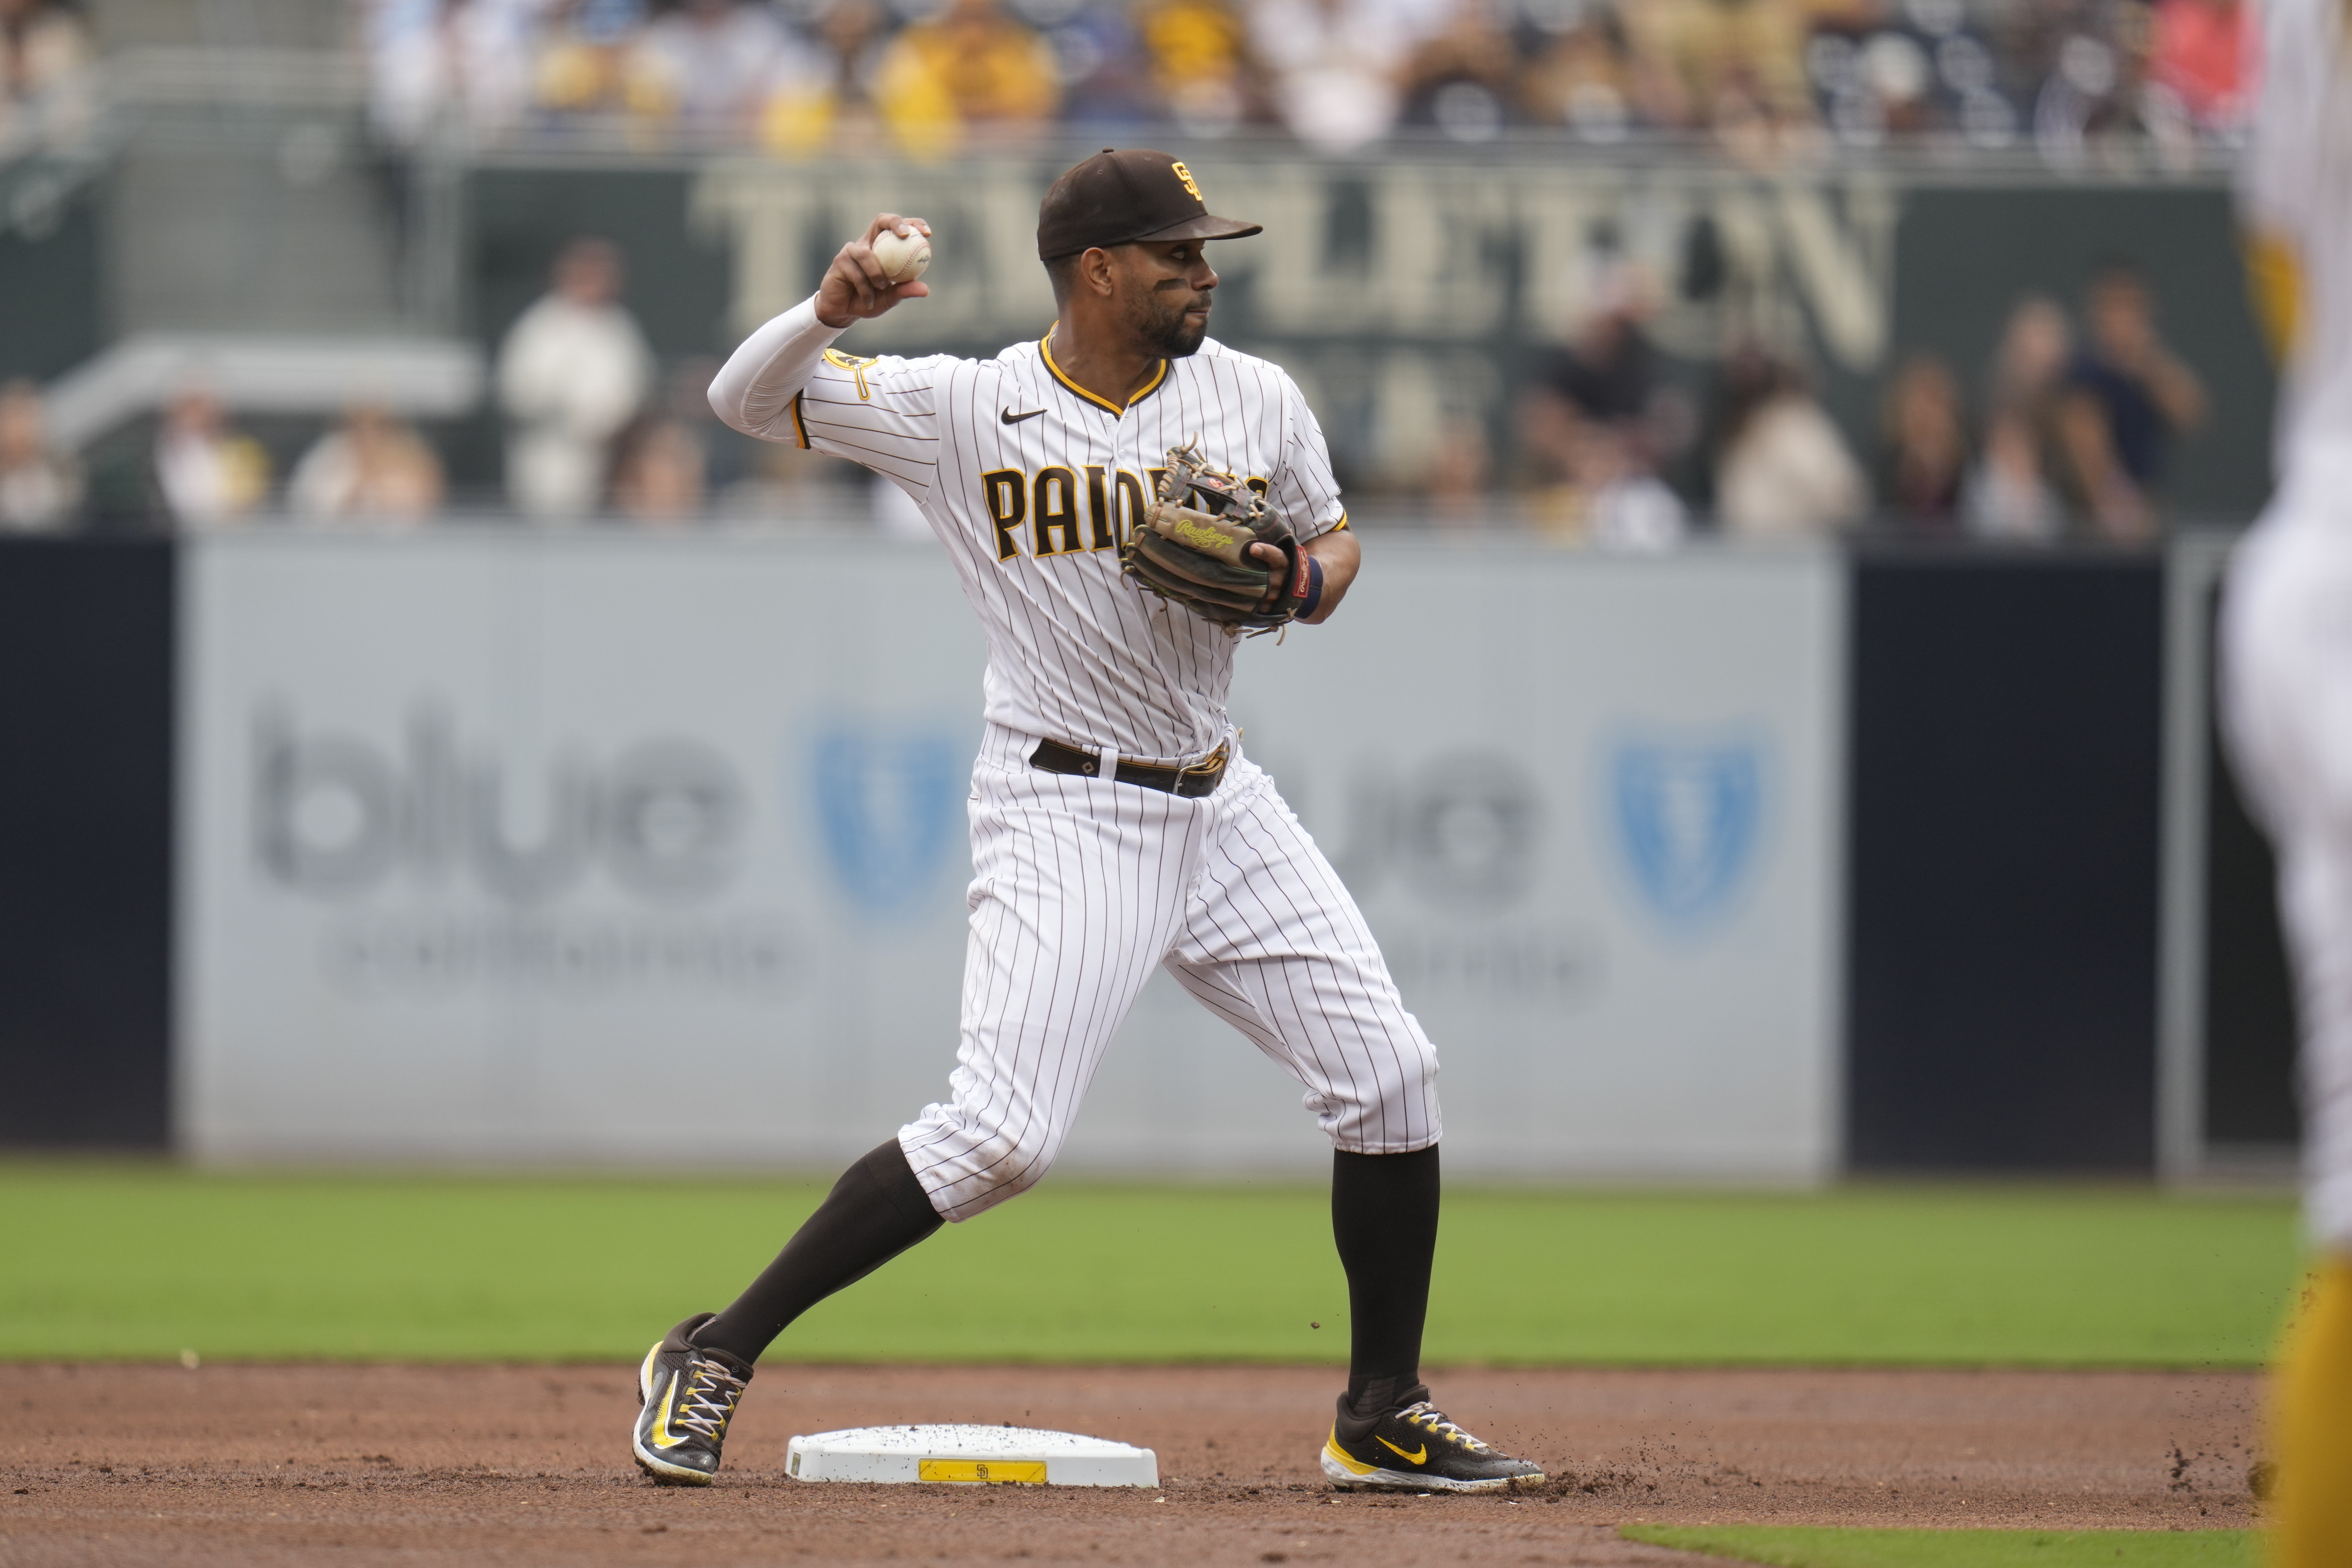 How to Watch the Pirates vs. Yankees Game: Streaming & TV Info